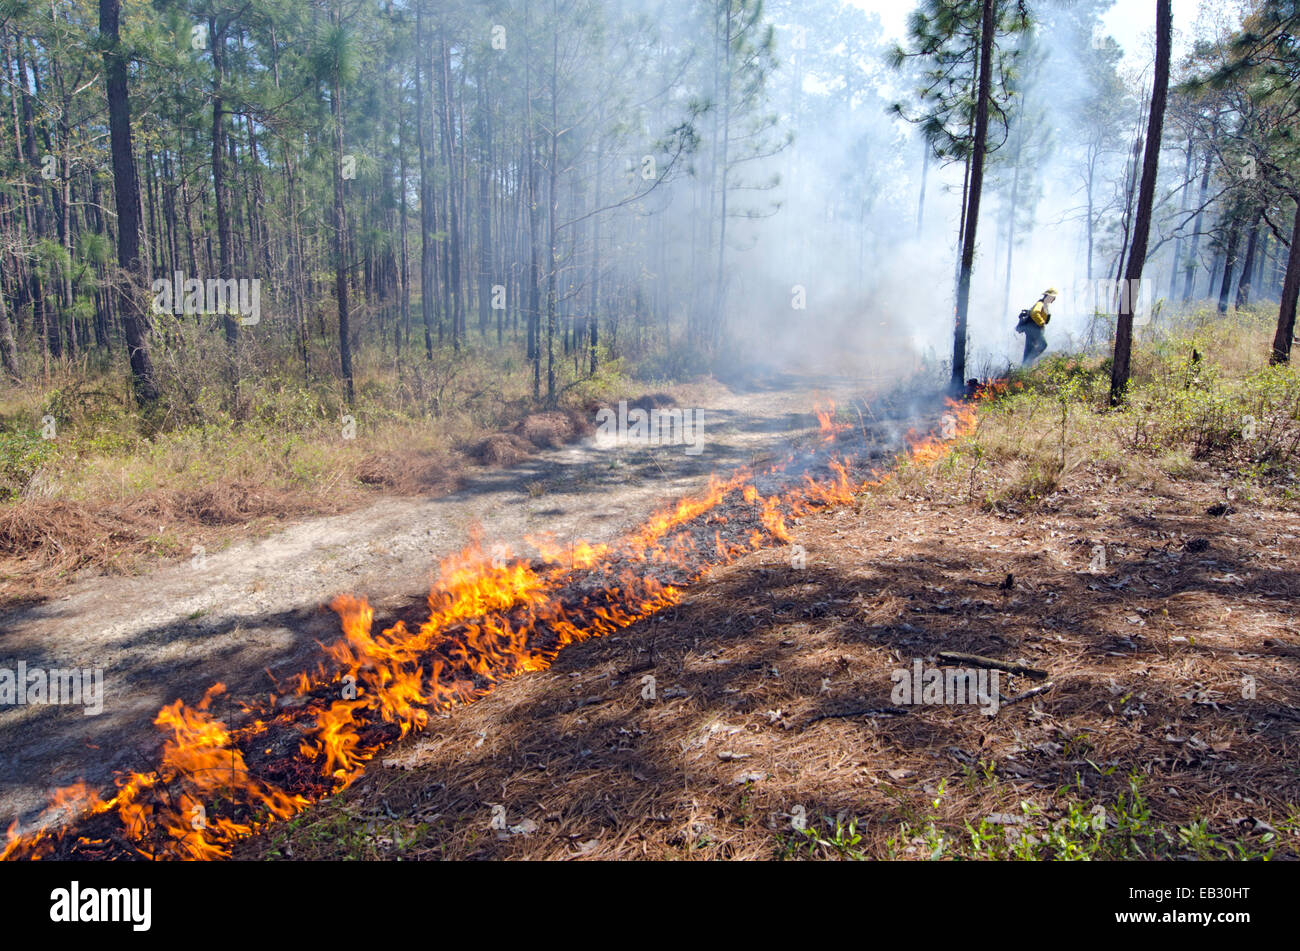 A firefighter lights a prescribed fire in the Moody Forest Natural Area managed by The Nature Conservancy. Stock Photo